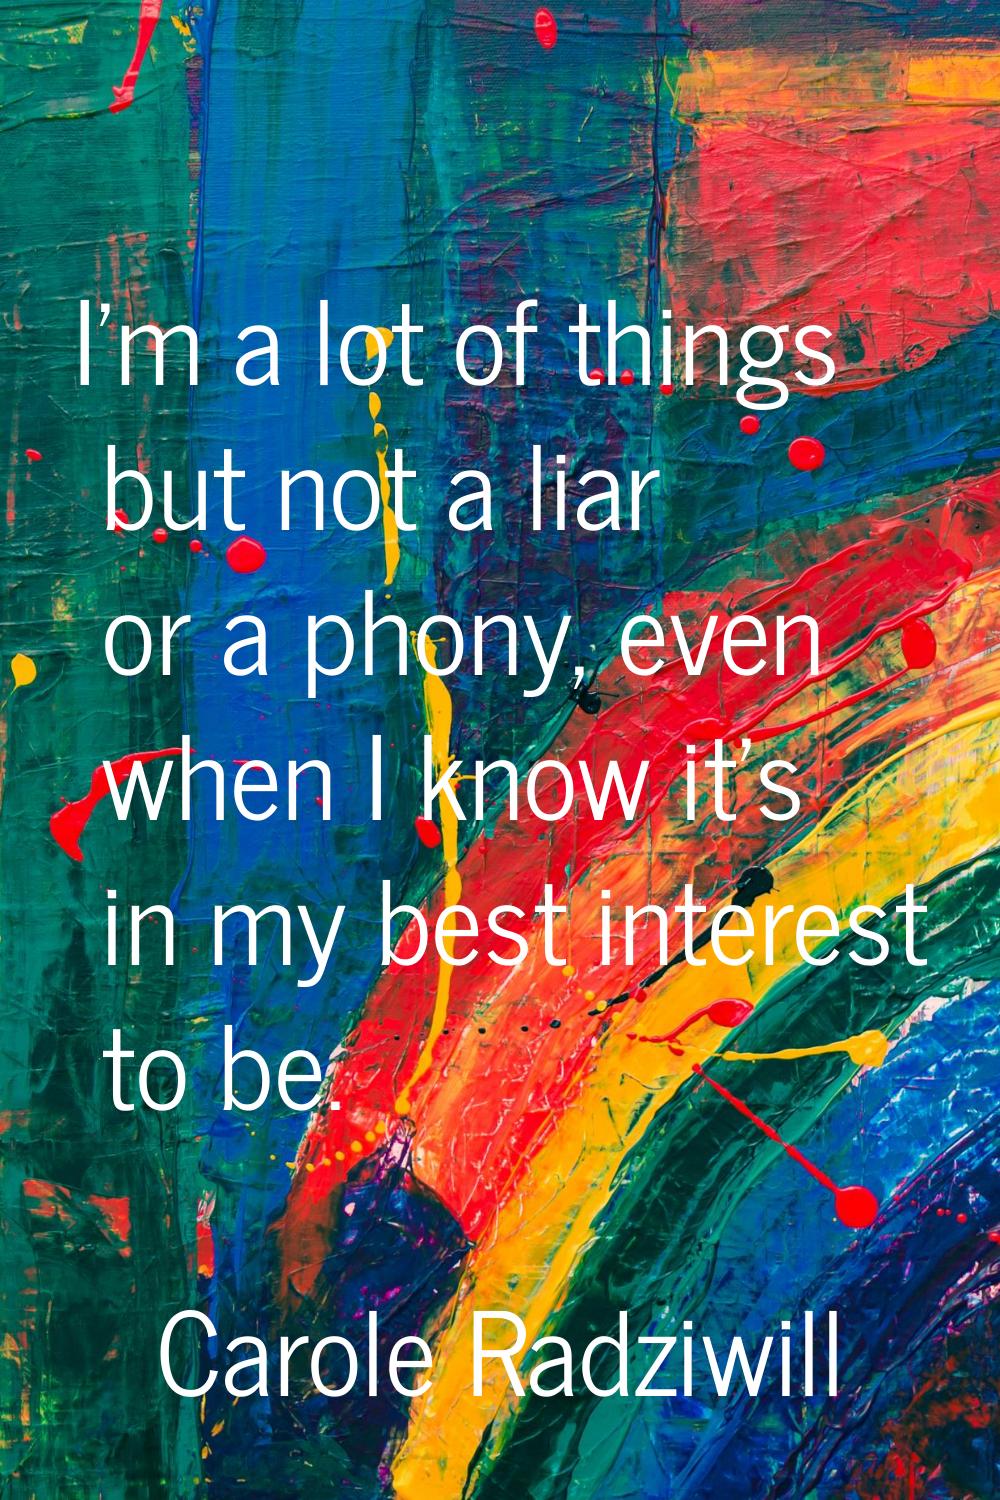 I'm a lot of things but not a liar or a phony, even when I know it's in my best interest to be.